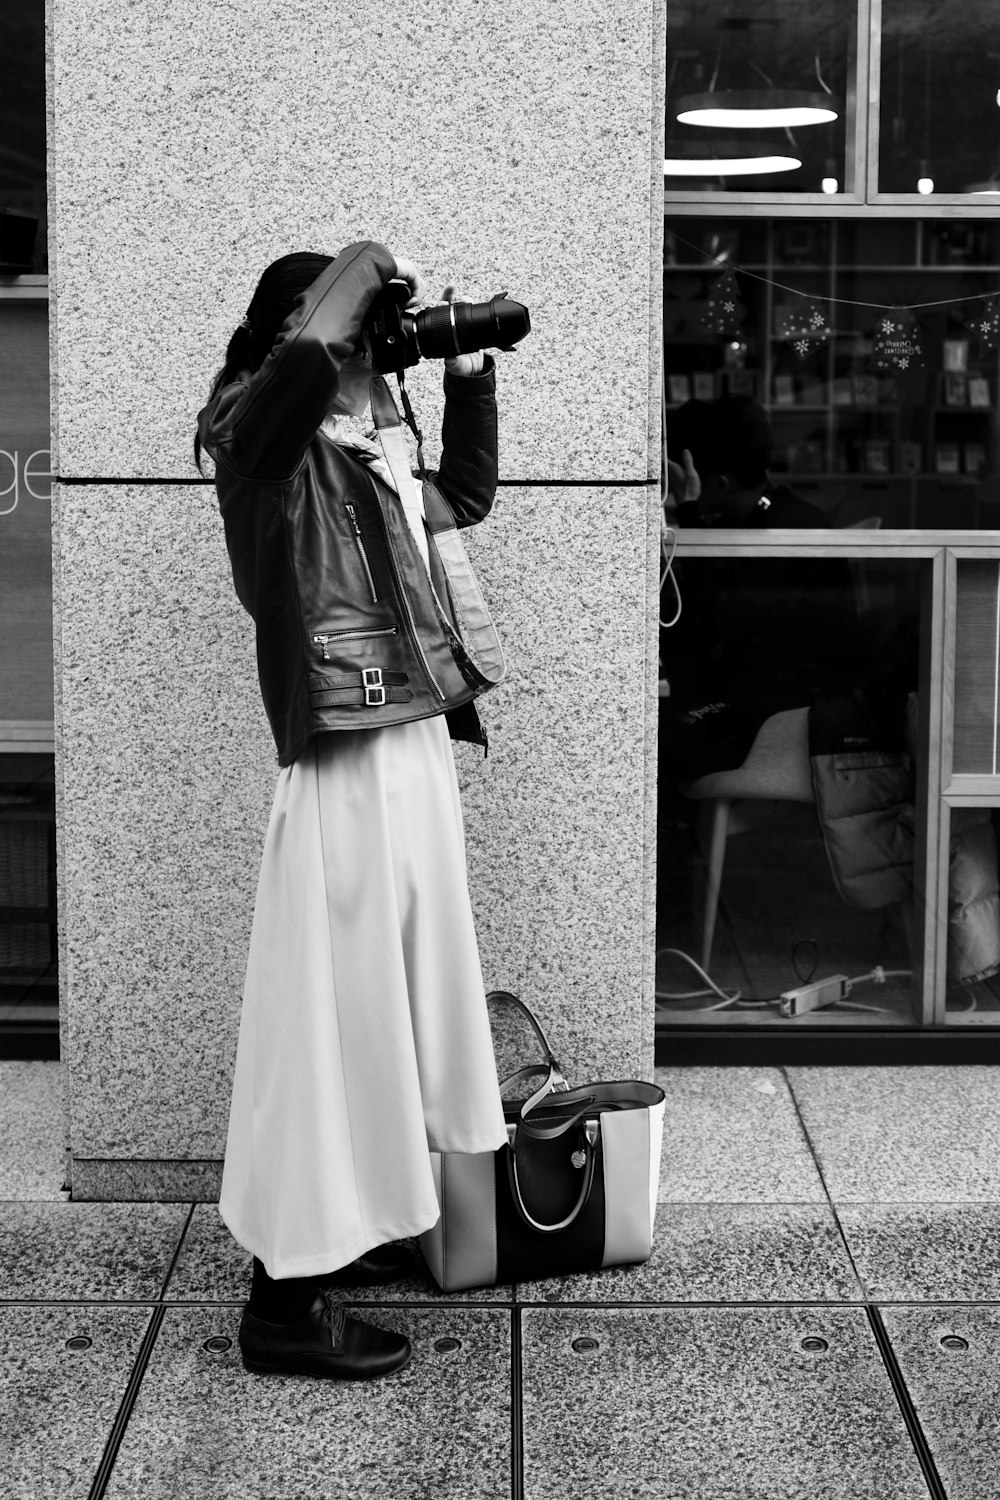 a woman standing on a sidewalk taking a picture with a camera